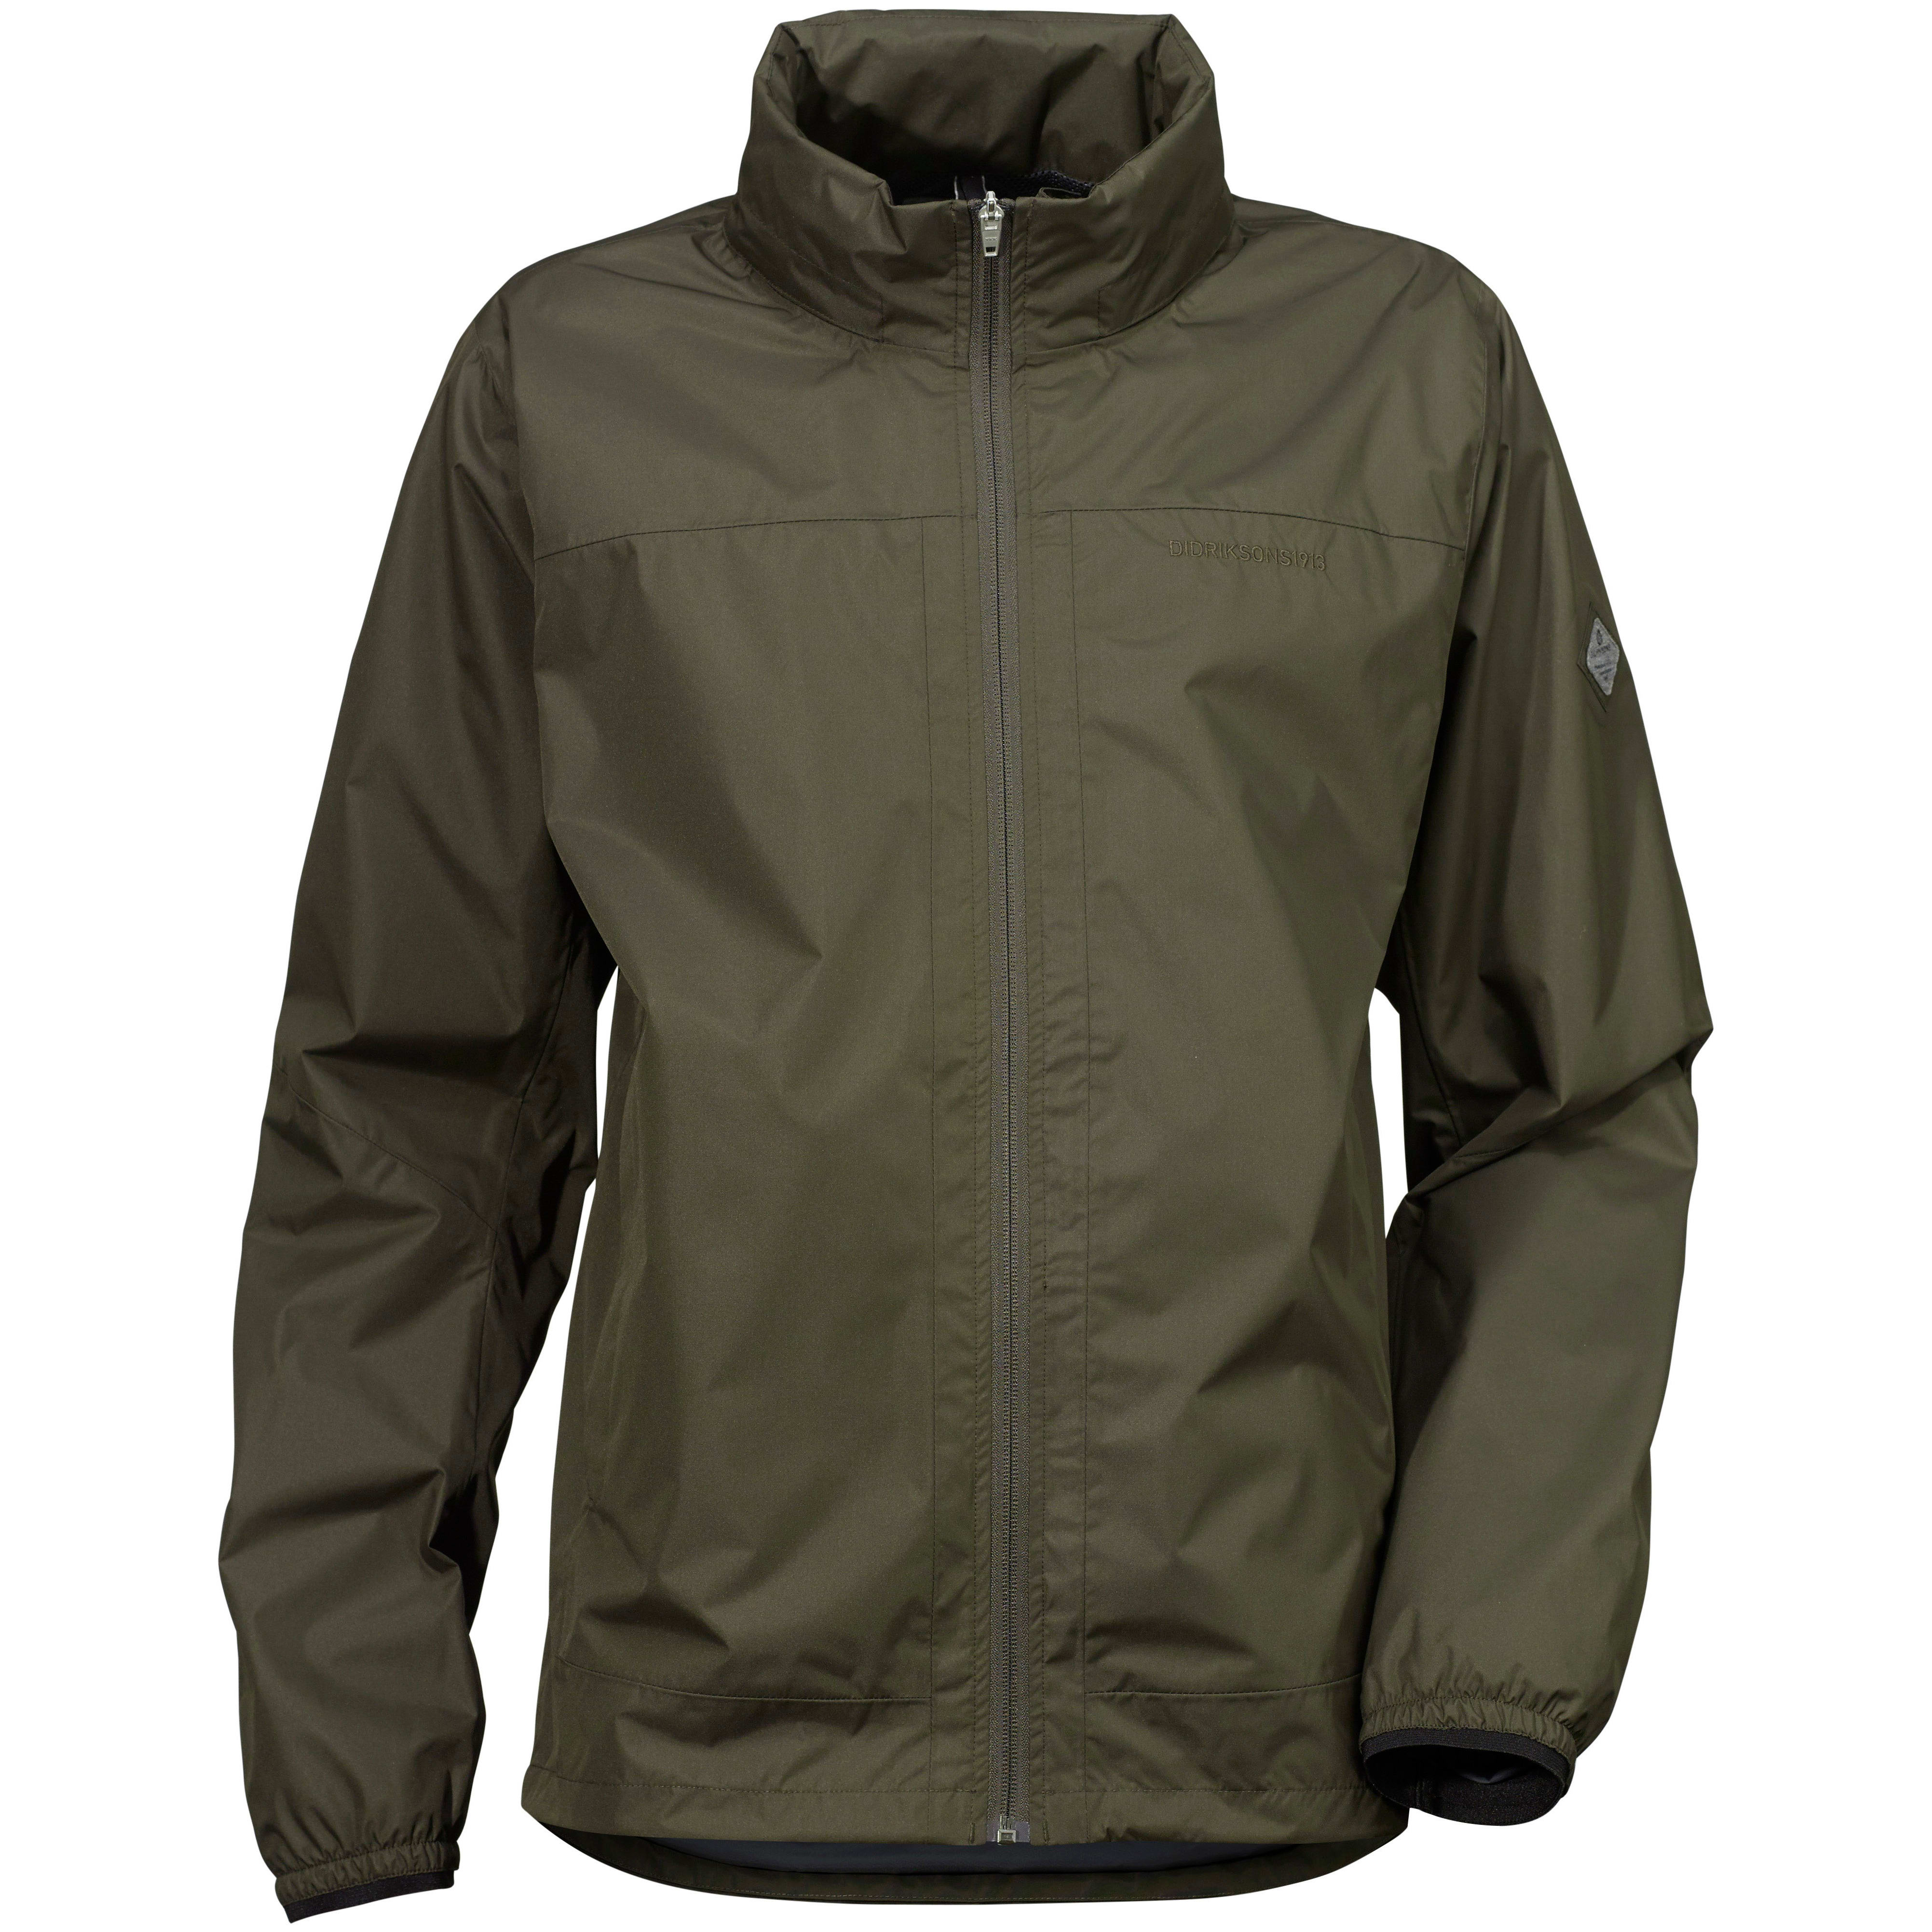 Buy Didriksons Nomadic Men's Jacket from Outnorth